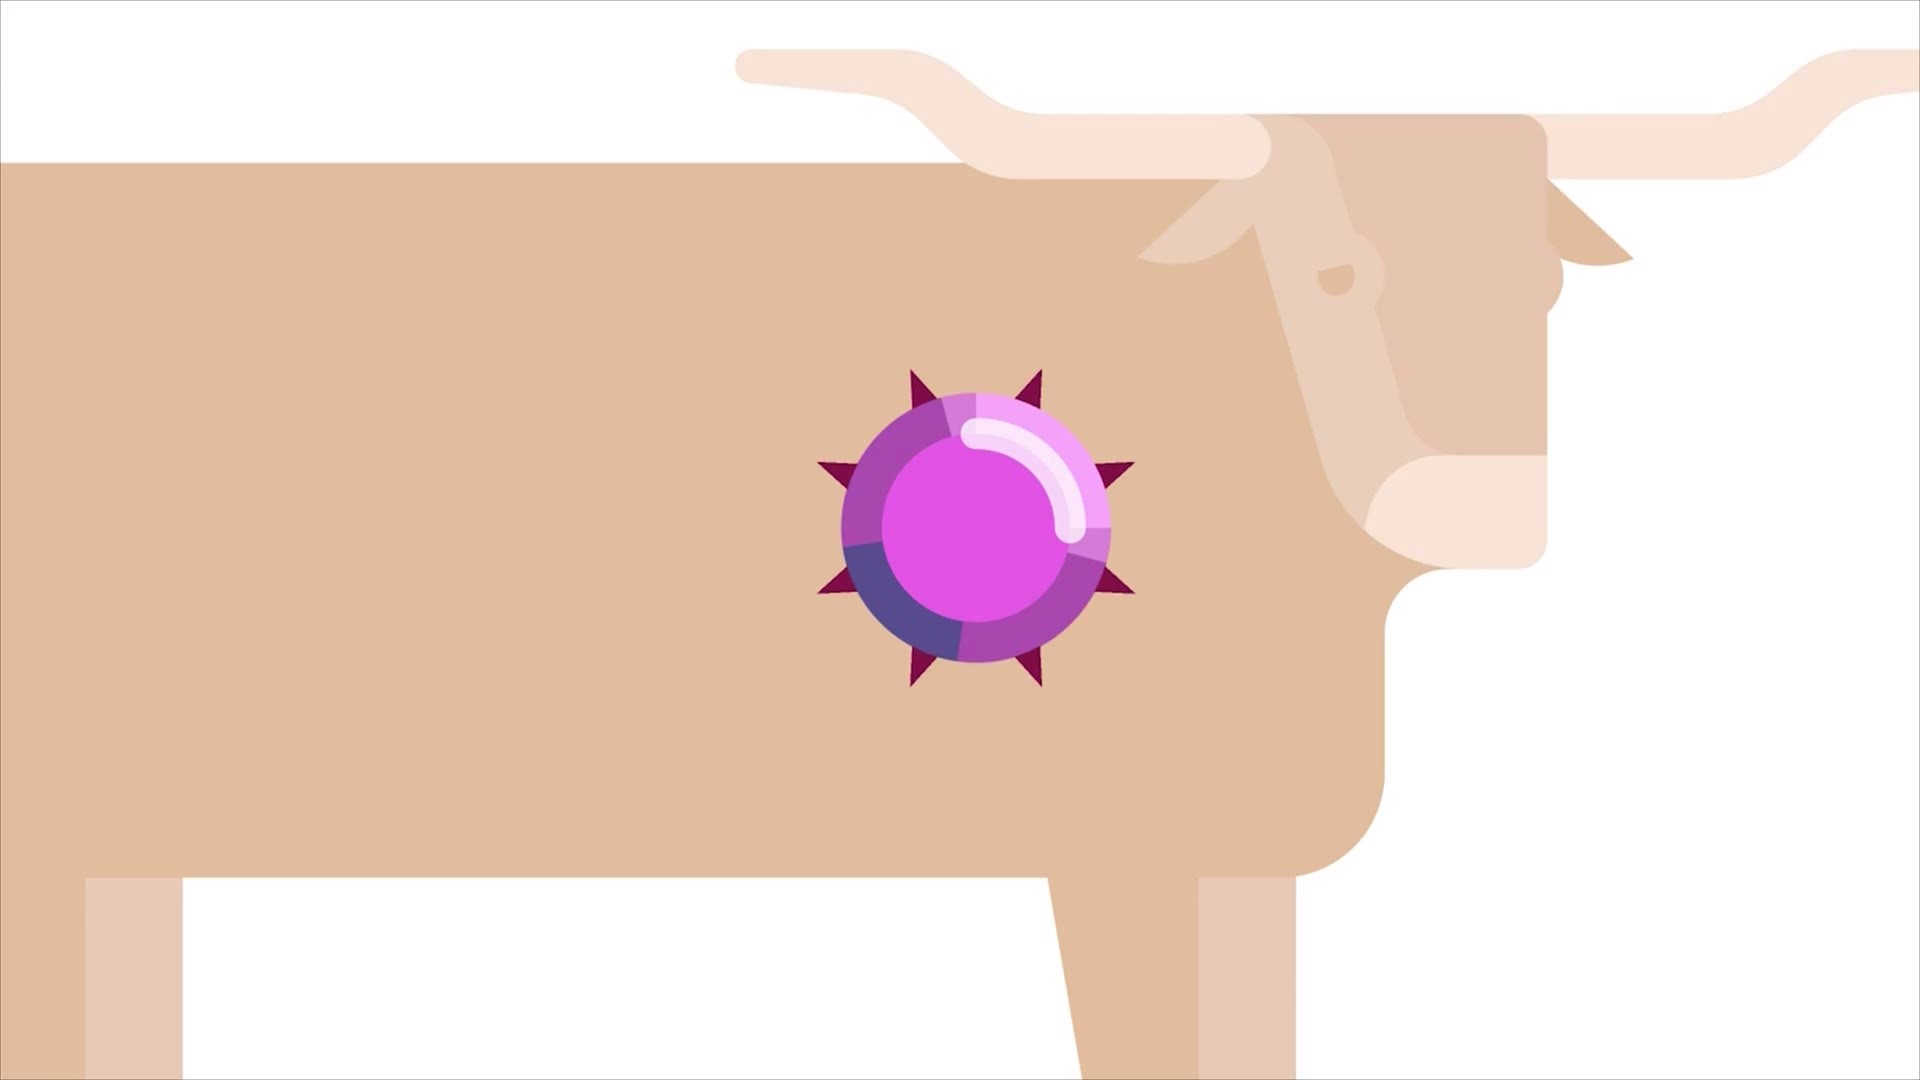 Researchers discovered the bovine leukemia virus Bevo XIV had contains a protein -- the same protein humans naturally produce that helps them fight Hepatitis C. The protein almost acts like a shield against Hepatitis C in humans. Here's a look at how that